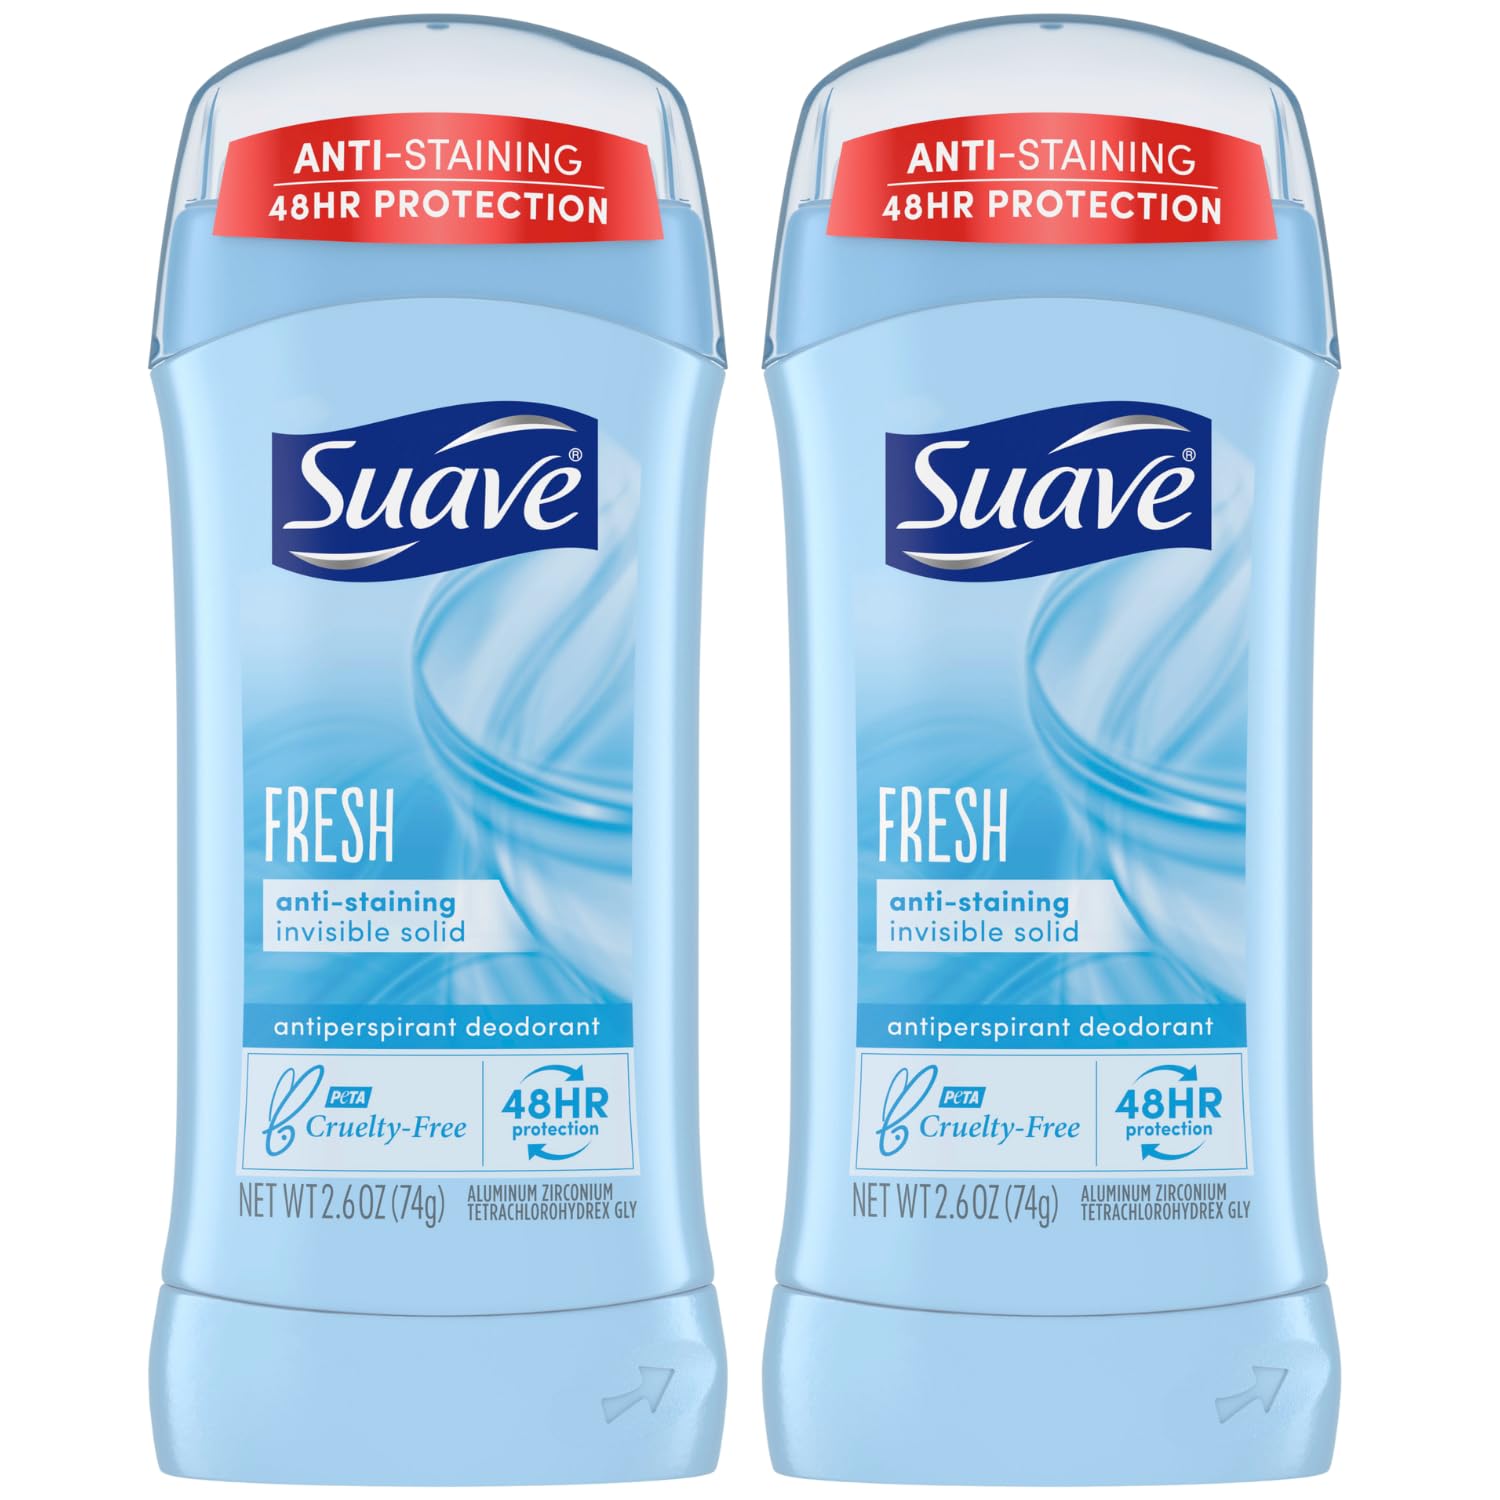 Suave Deodorant for Women, Fresh – Invisible Solid Antiperspirant Deodorant Stick, 48H Protection, Anti-Staining, Cruelty-Free, Scented, 2.6 Oz (Pack of 2)